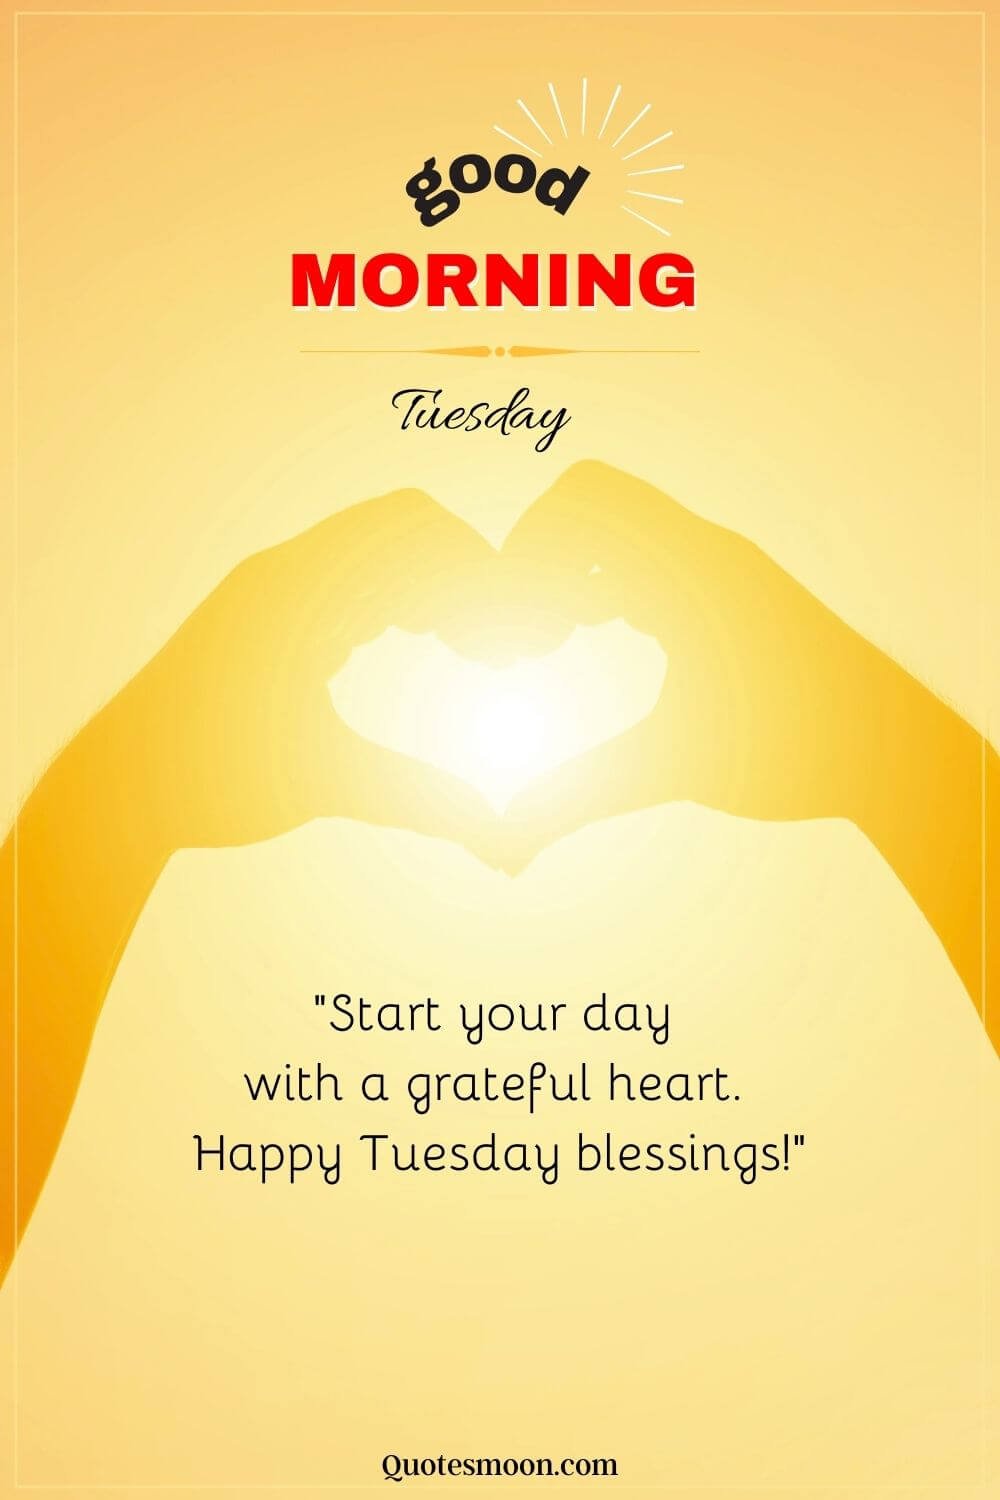 tuesday morning wishes for my love